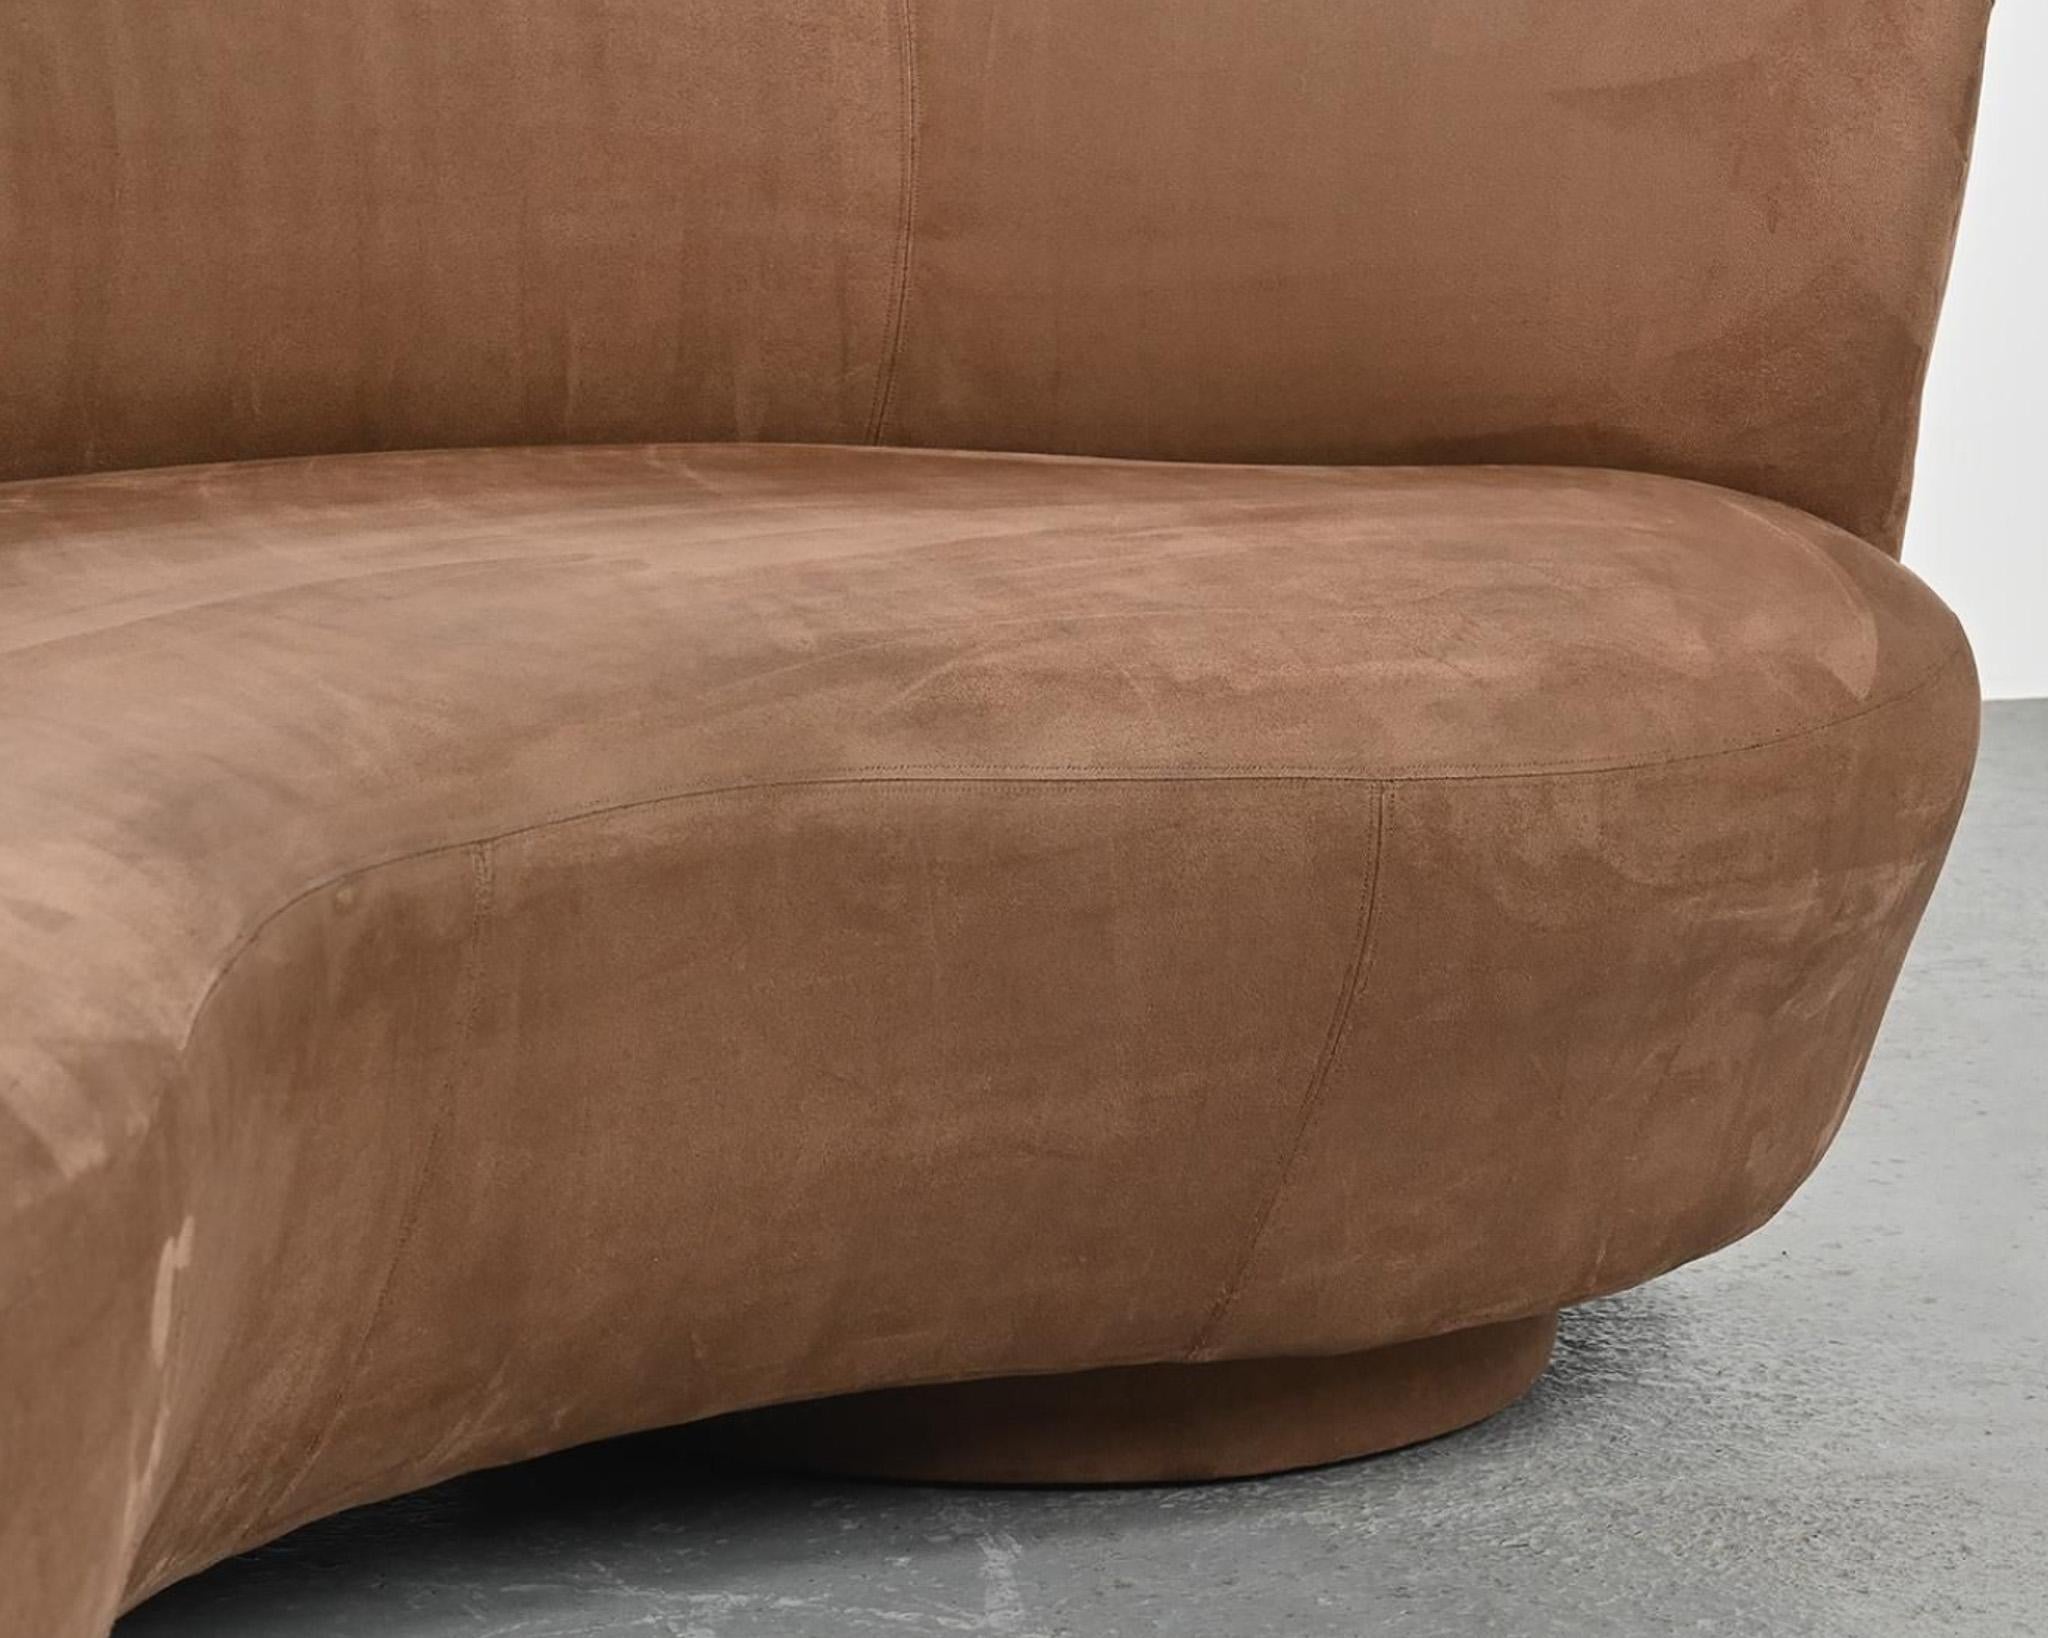 Vladimir Kagan Curved Free Form Styled Sofa in Suede Upholstery, 1990s In Good Condition For Sale In Stockholm, SE